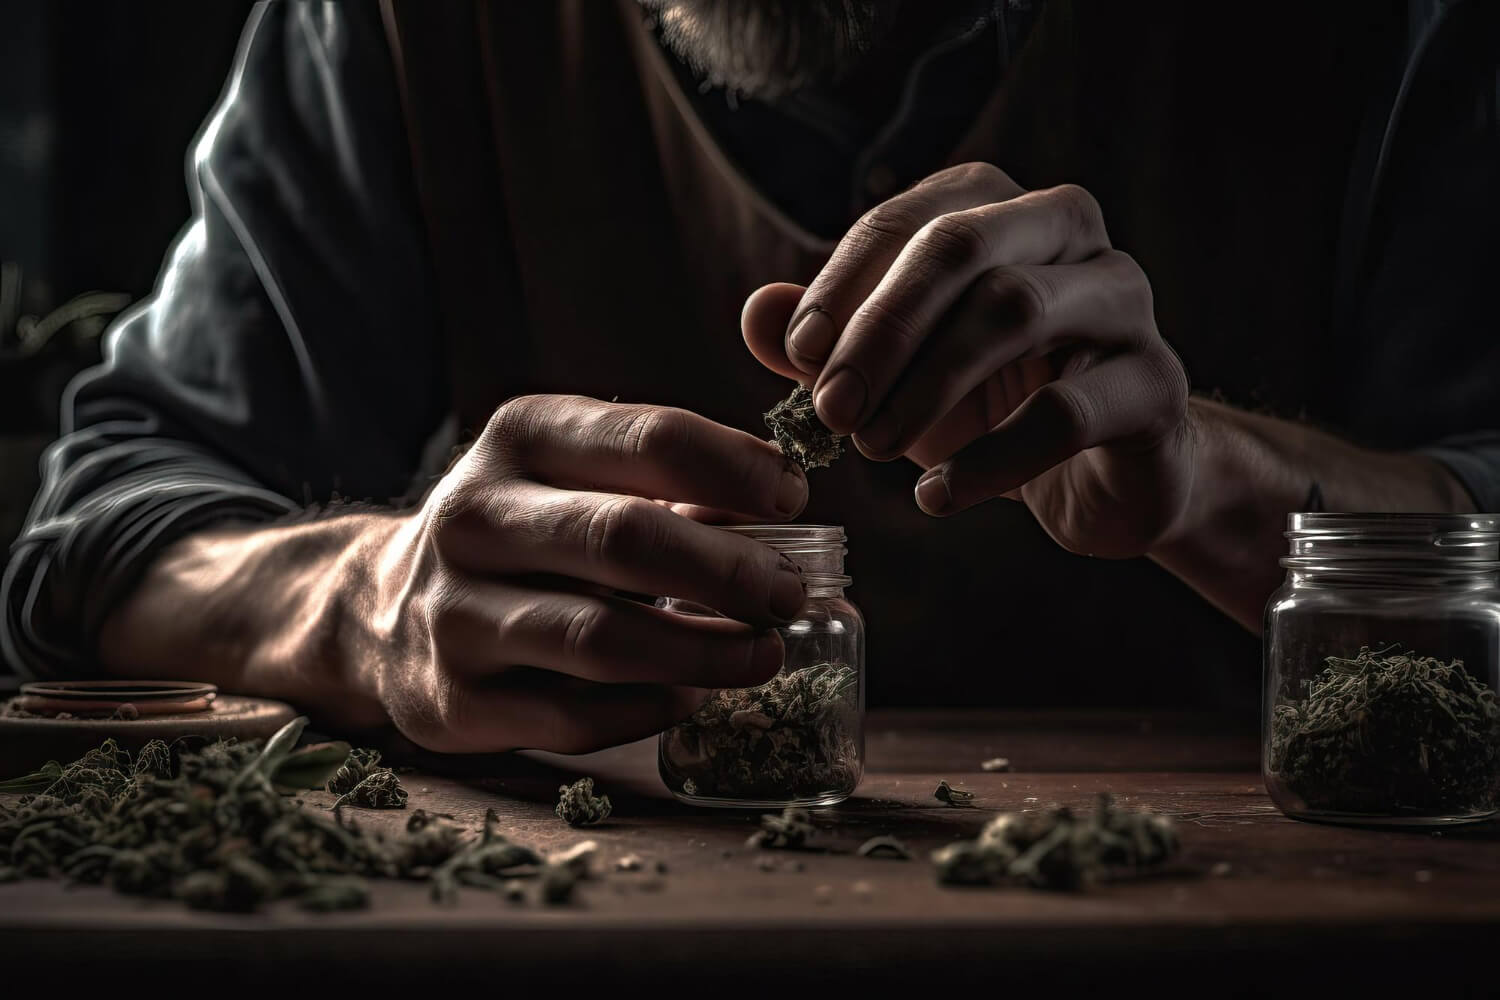 Laced weed can cause serious health issues and may even lead to death